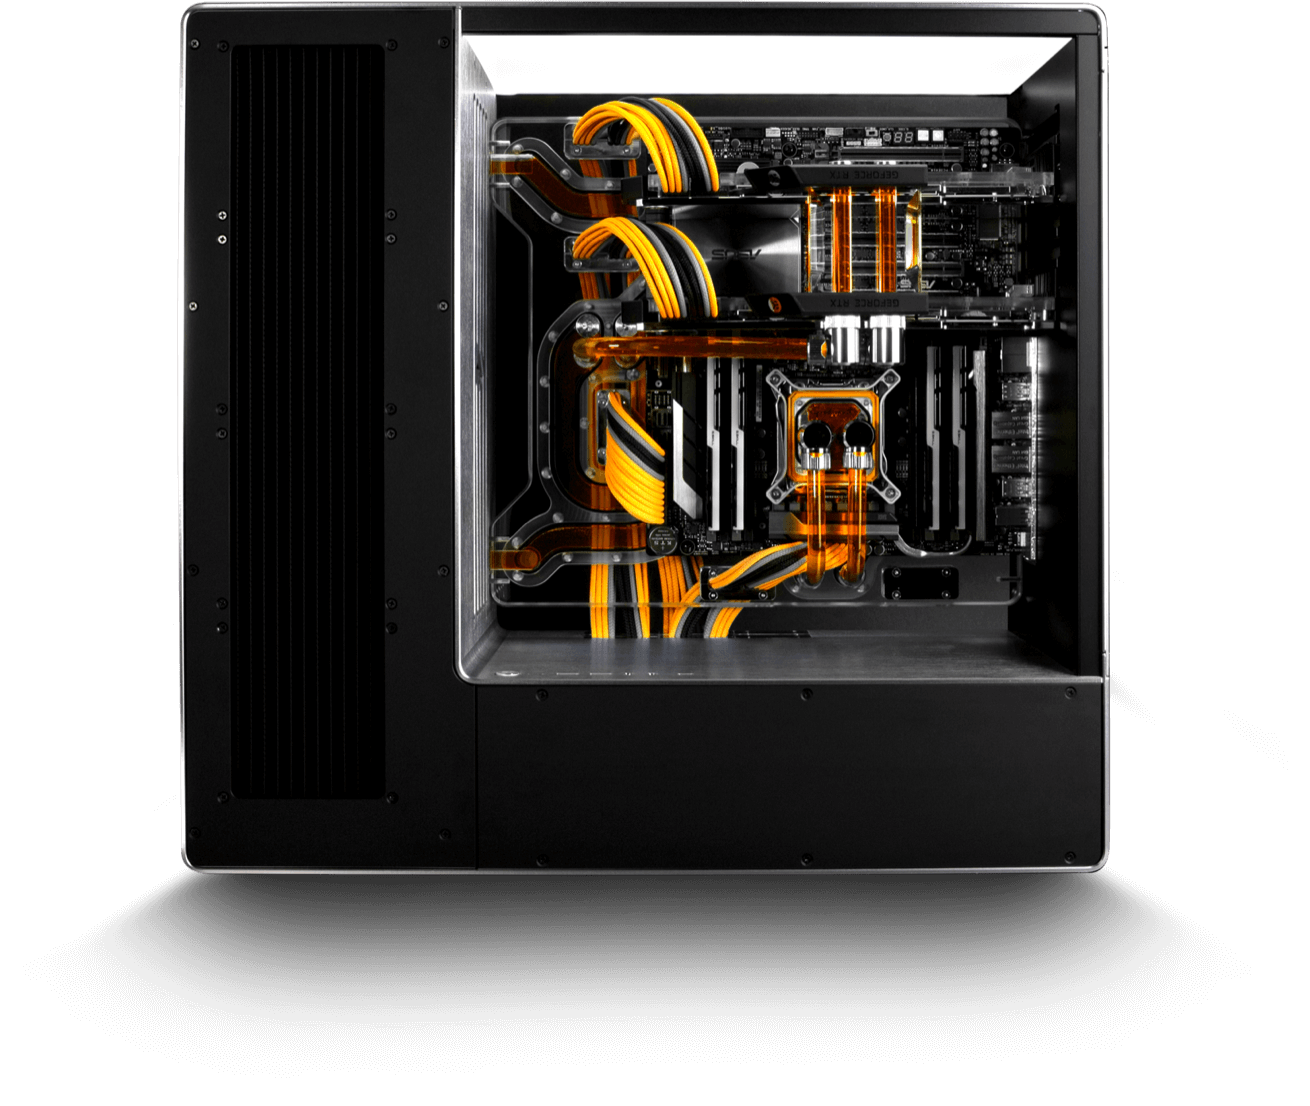 How to Select a Cooling System for a Gaming PC